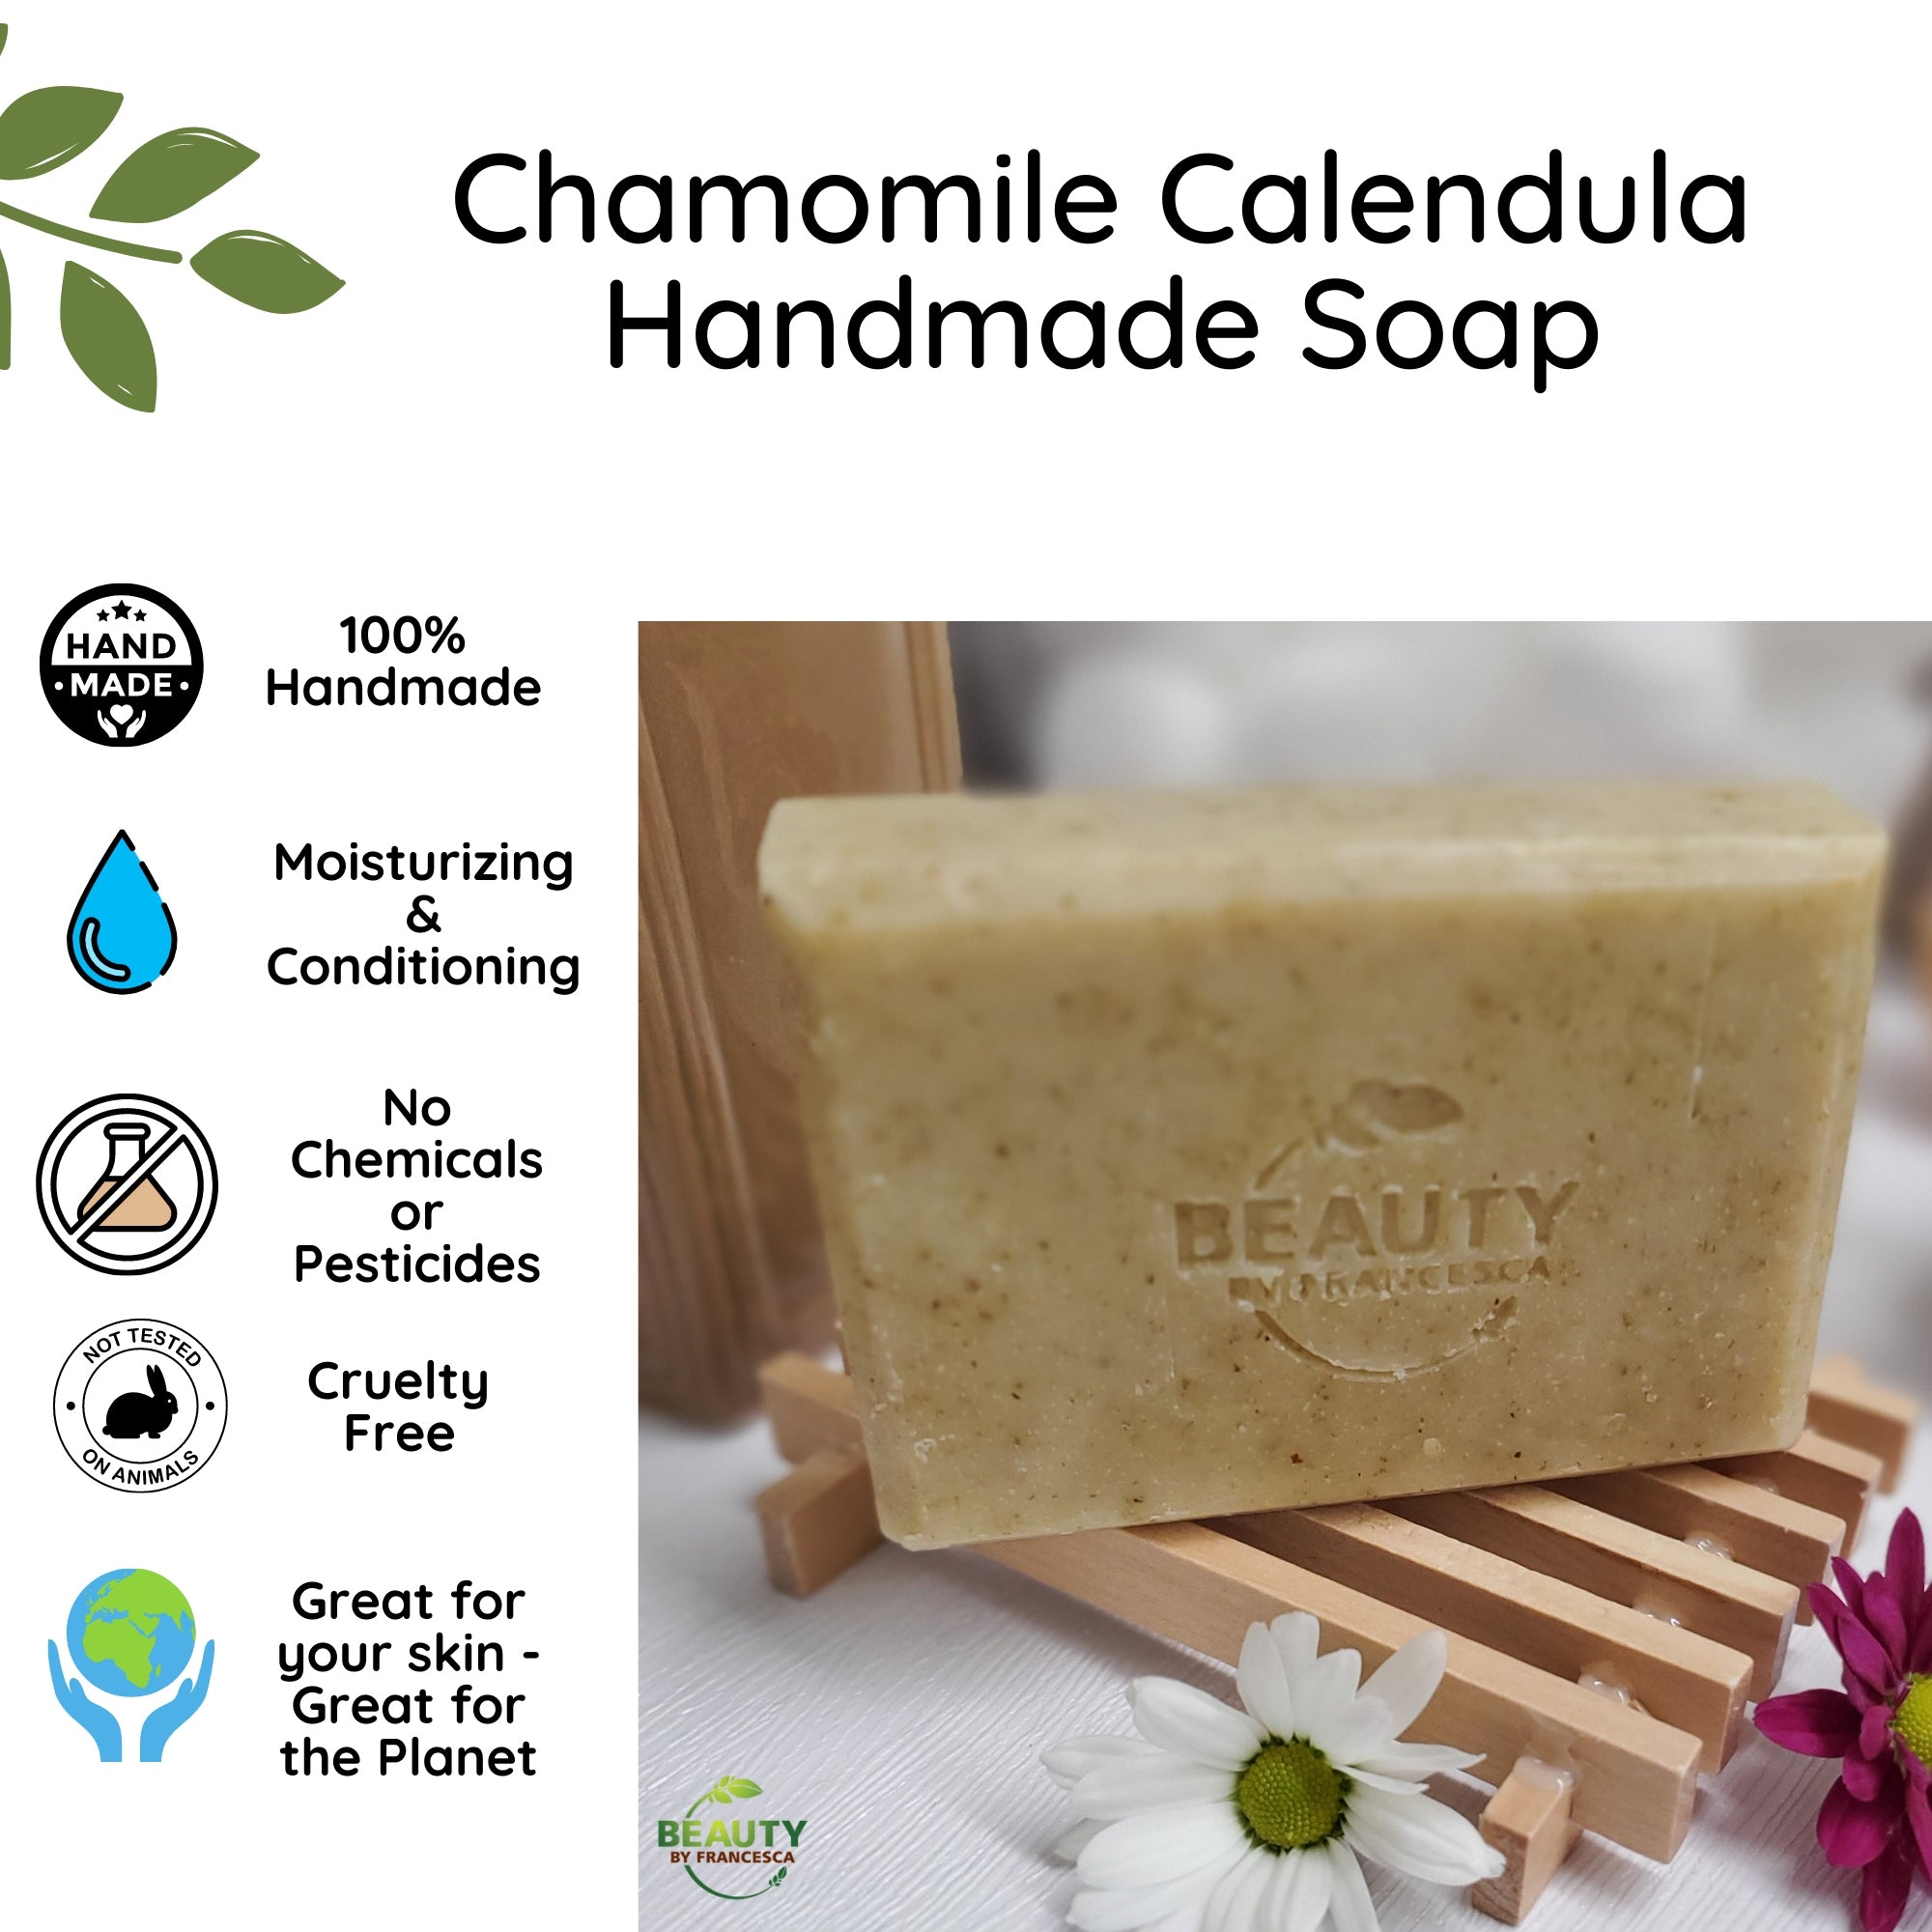 Chamomile Calendula Handmade Soap Benefits Card Great for skin and planet no chemicals